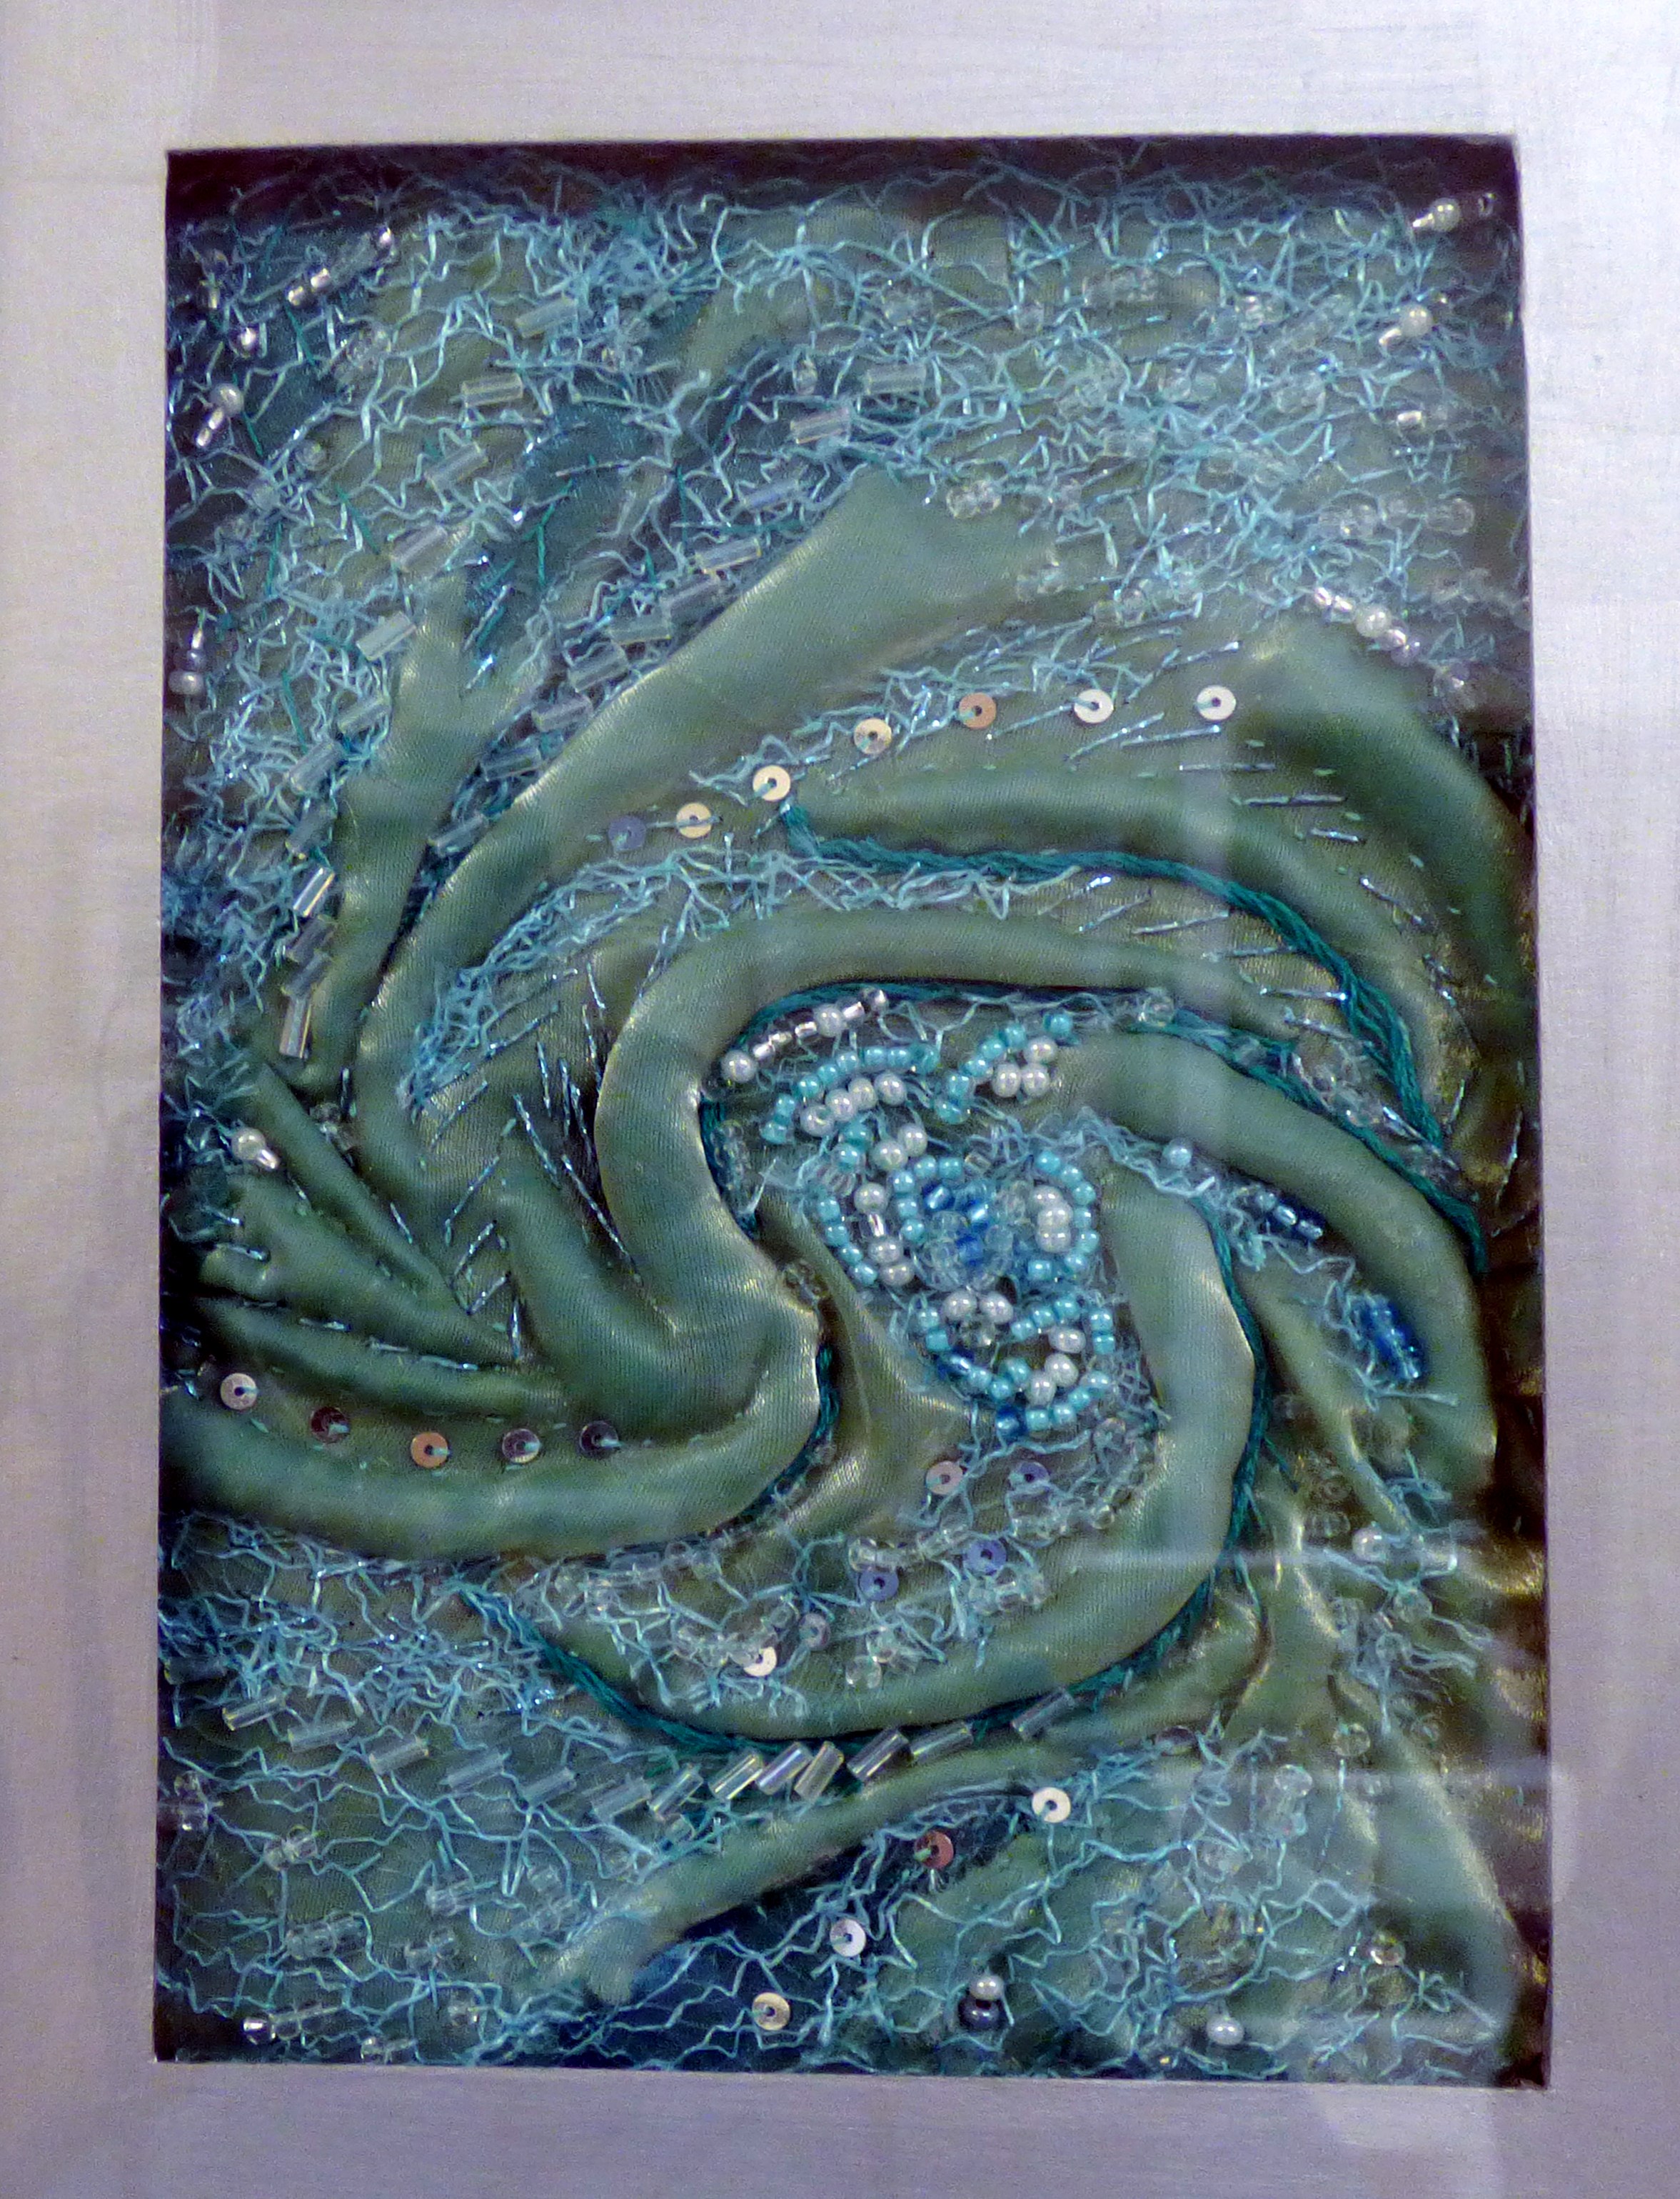 WHIRLPOOL by Linda Herbert, couching, hand stitching and beads, ConText group 2018